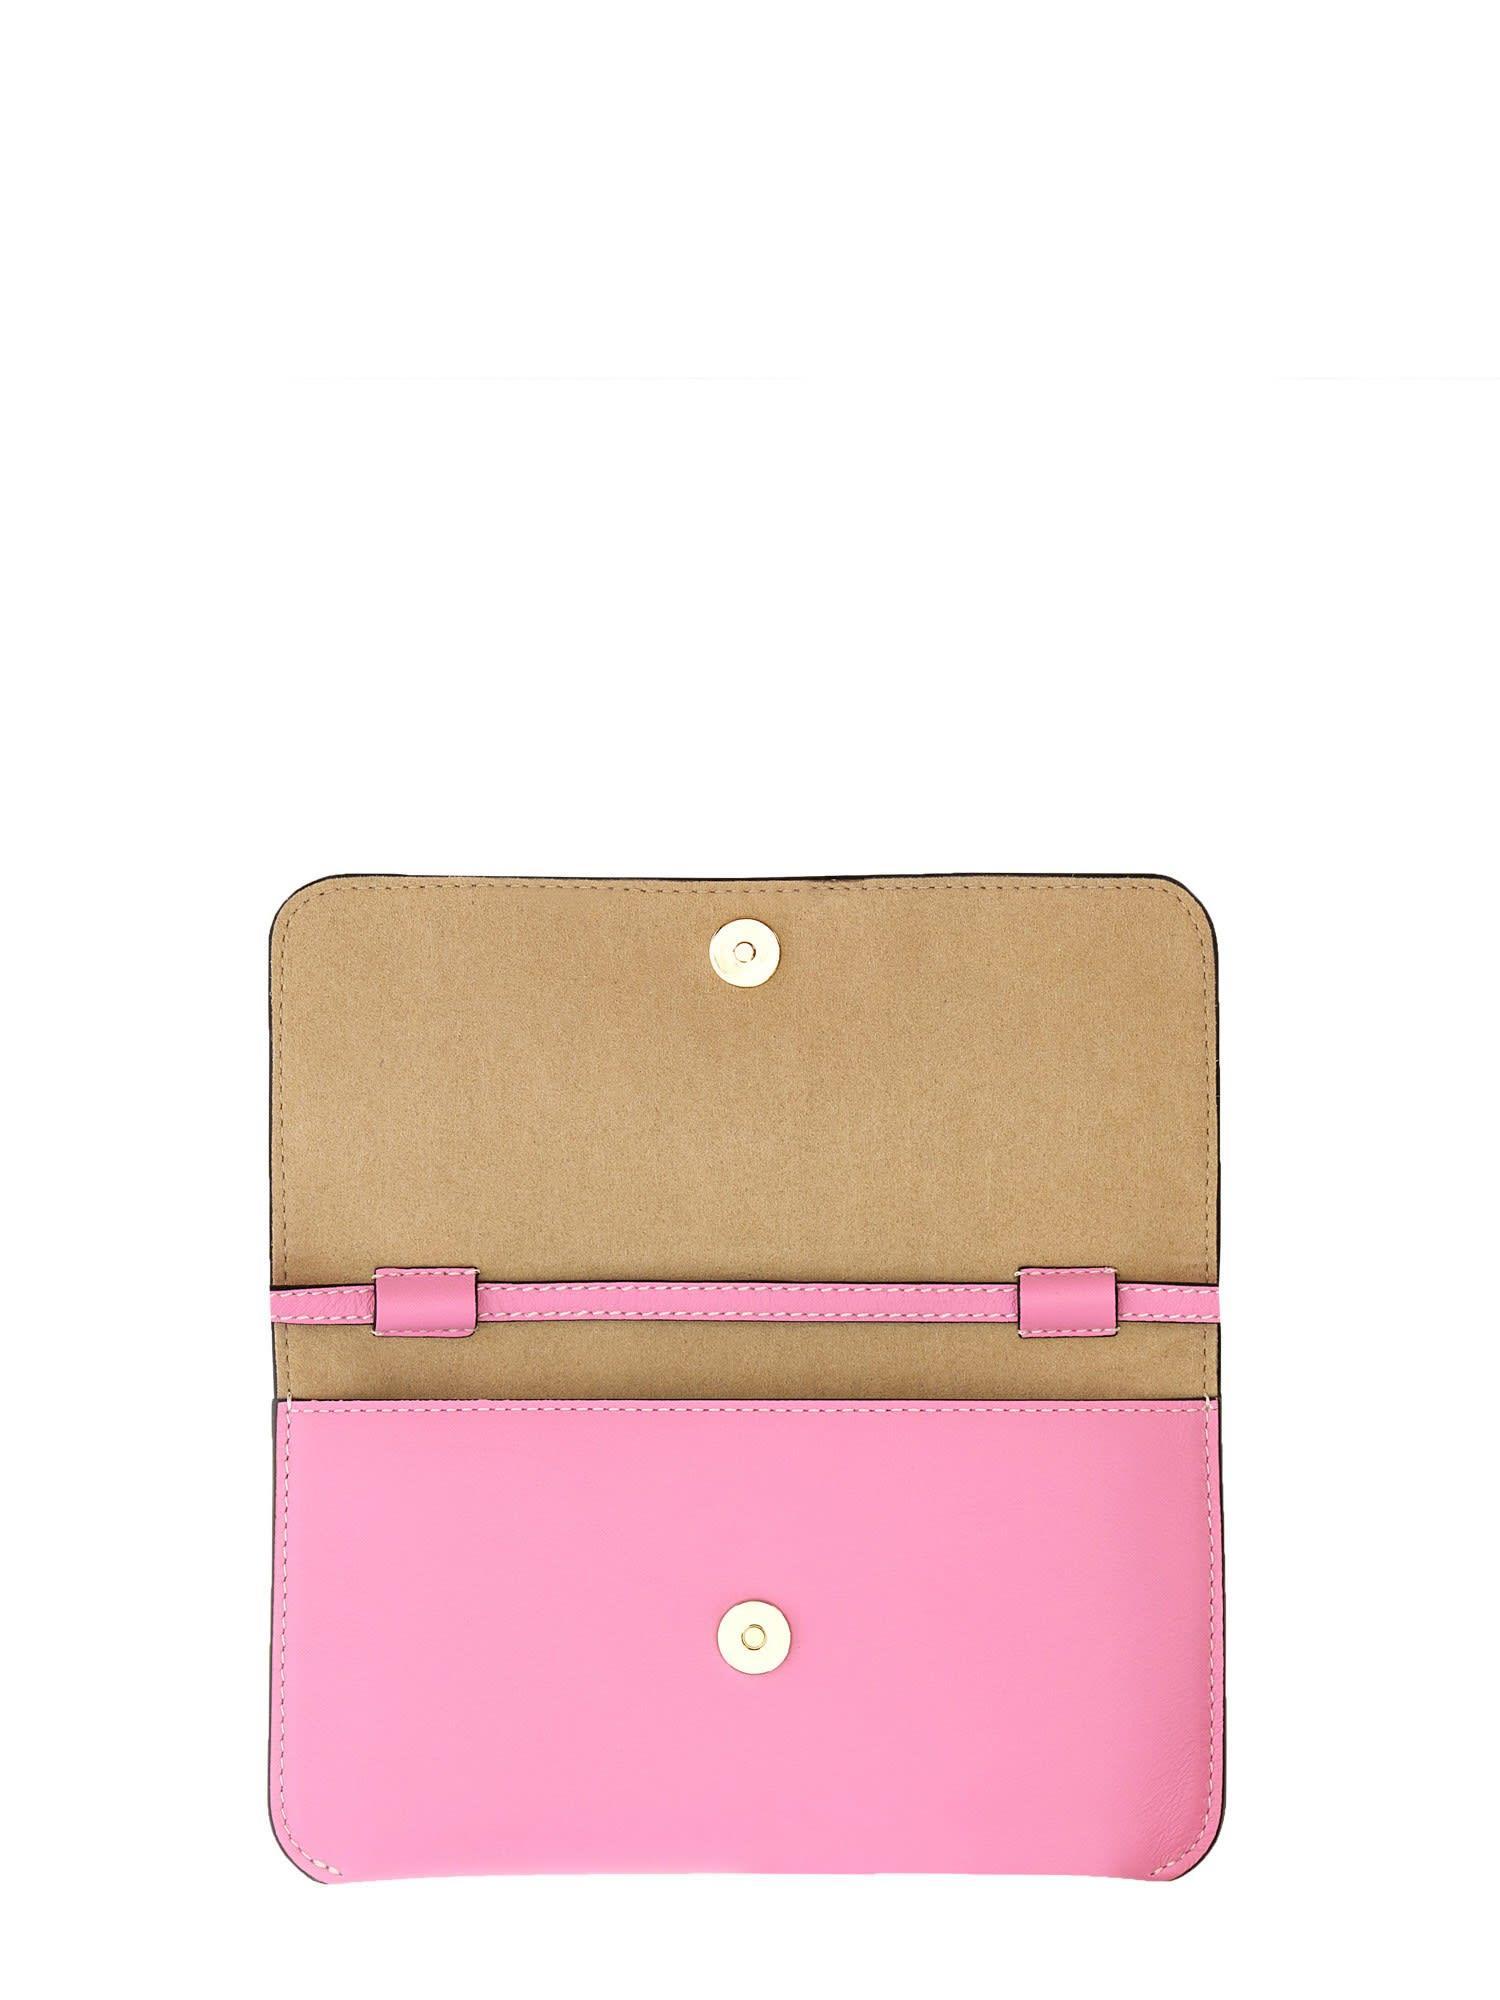 JW Anderson Leather Chain Smartphone Bag in Pink | Lyst